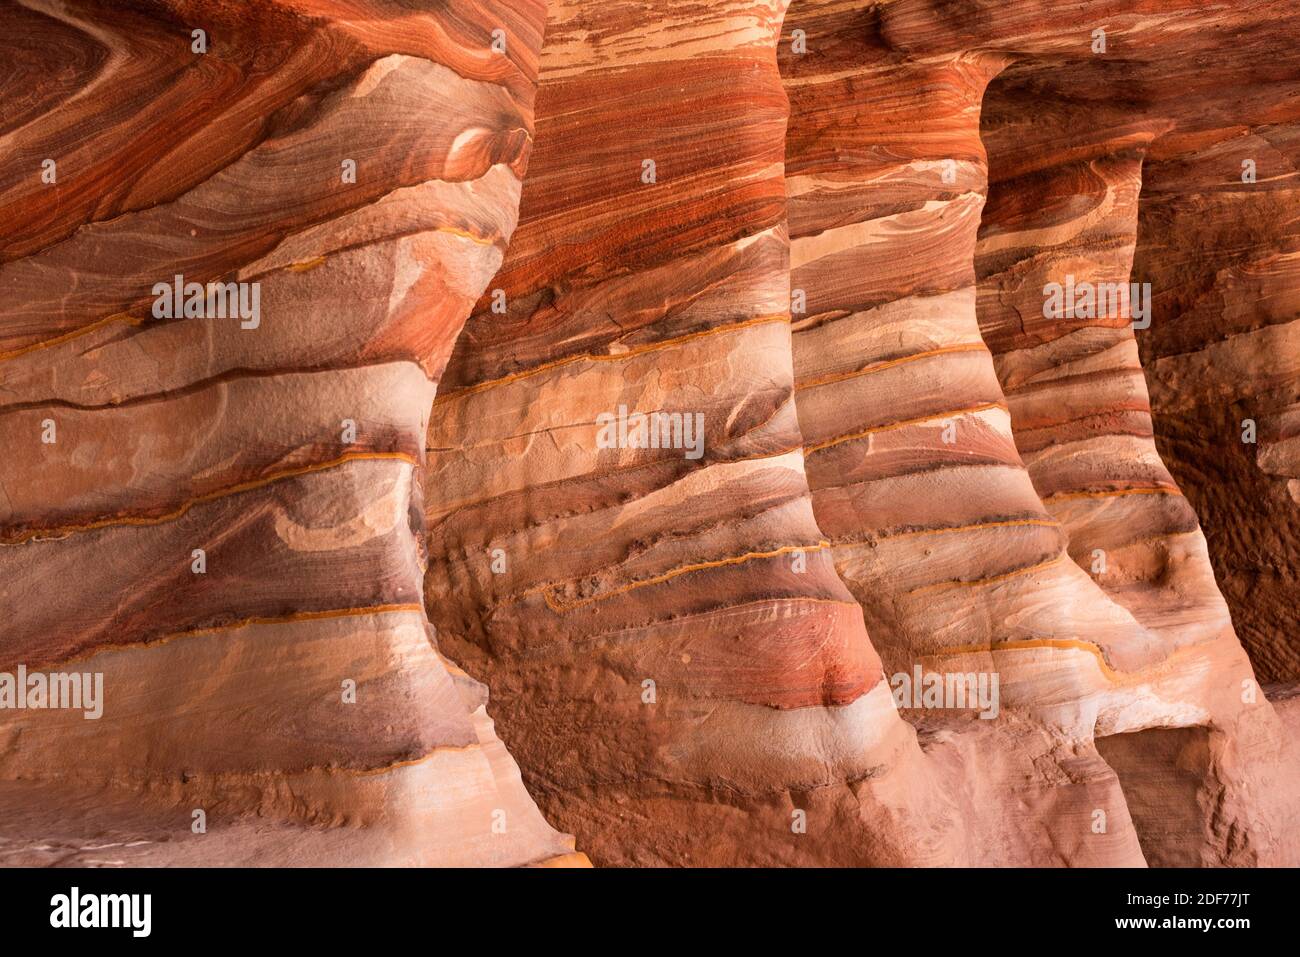 Multicoloured sandstone with cross stratification and Liesegang banding. This photo was taken in Petra, Jordan. Stock Photo